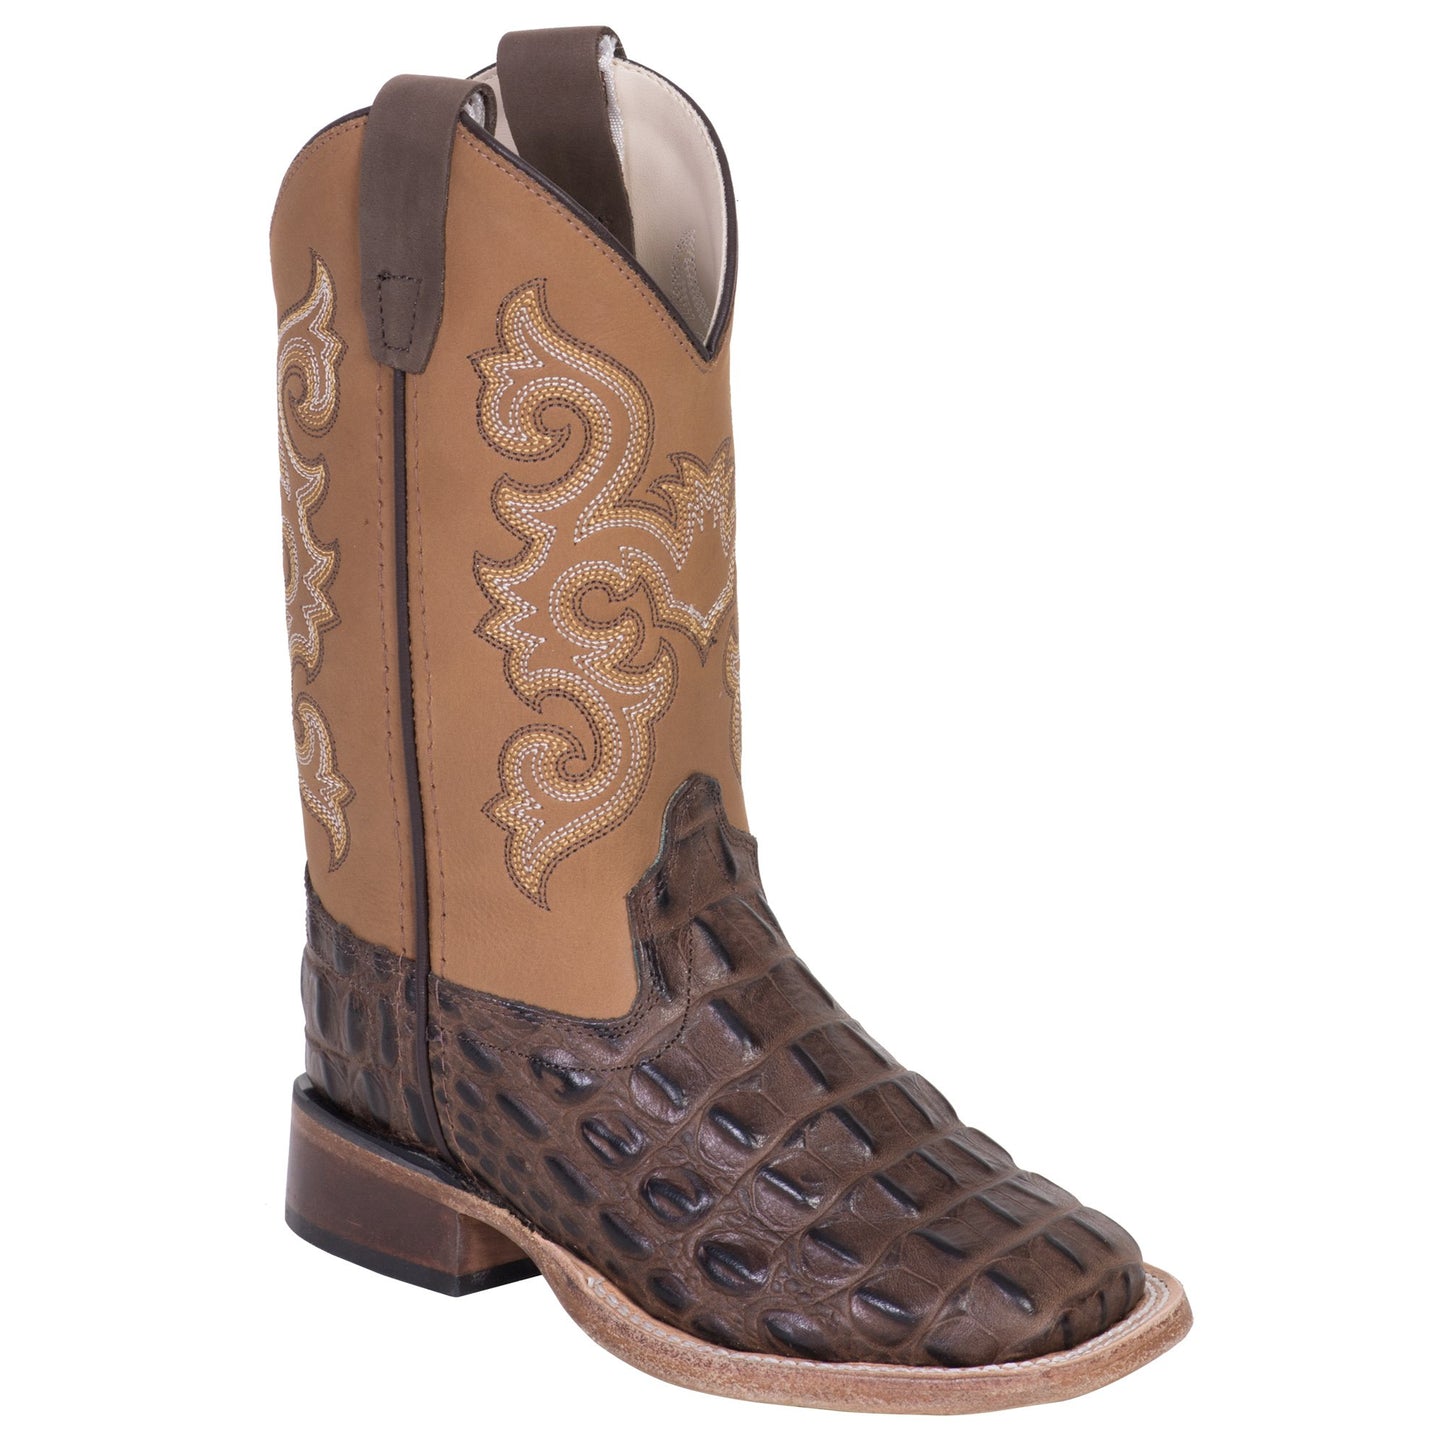 OLD WEST BROWN/TAN LEATHER CAIMAN BOOT